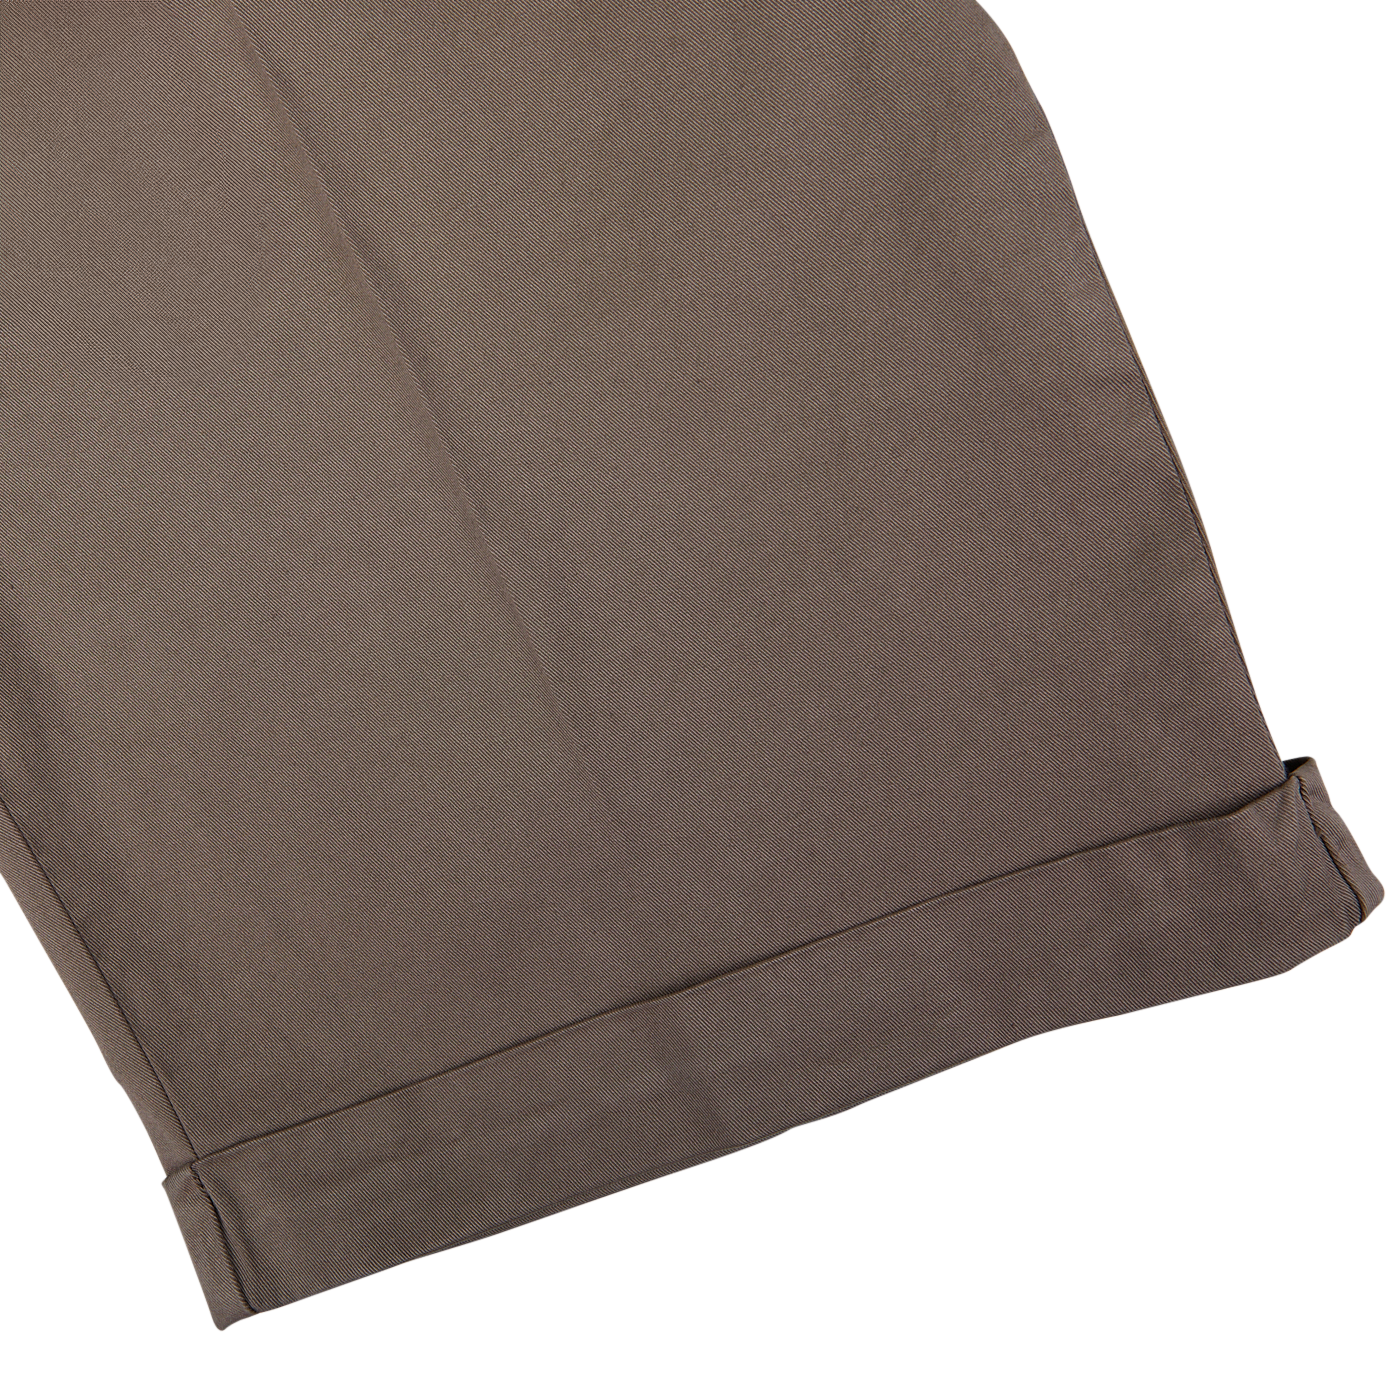 A close-up of a Light Brown Berwich cotton blend pleated shorts leg with a neatly pressed crease and cuff.